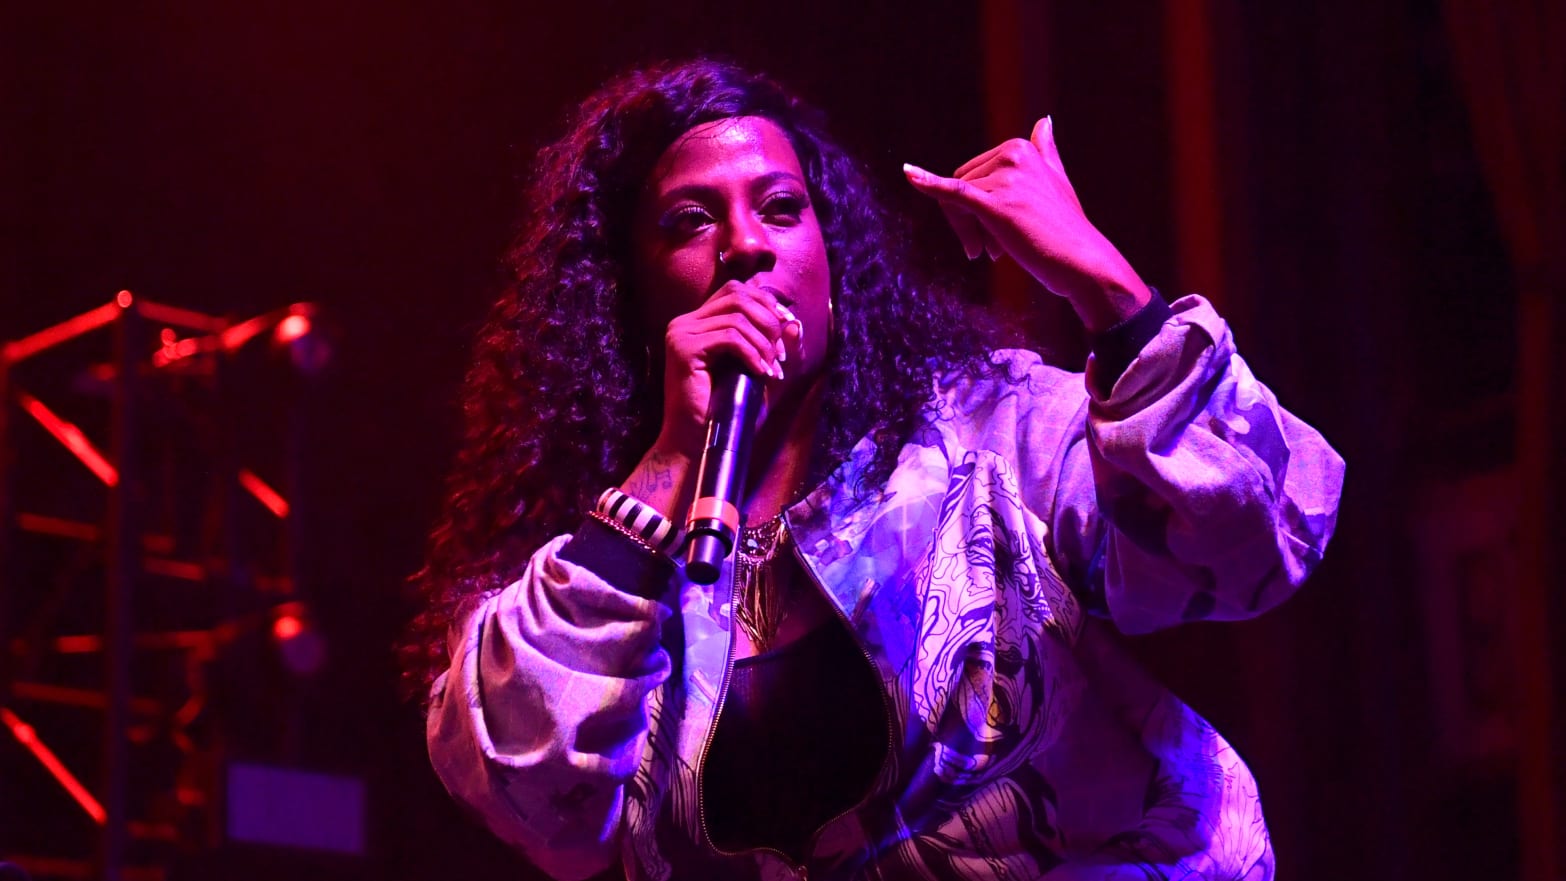 Gangsta Boo performs at The Run The Jewels Concert at The Tabernacle on January 21, 2017 in Atlanta, Georgia.